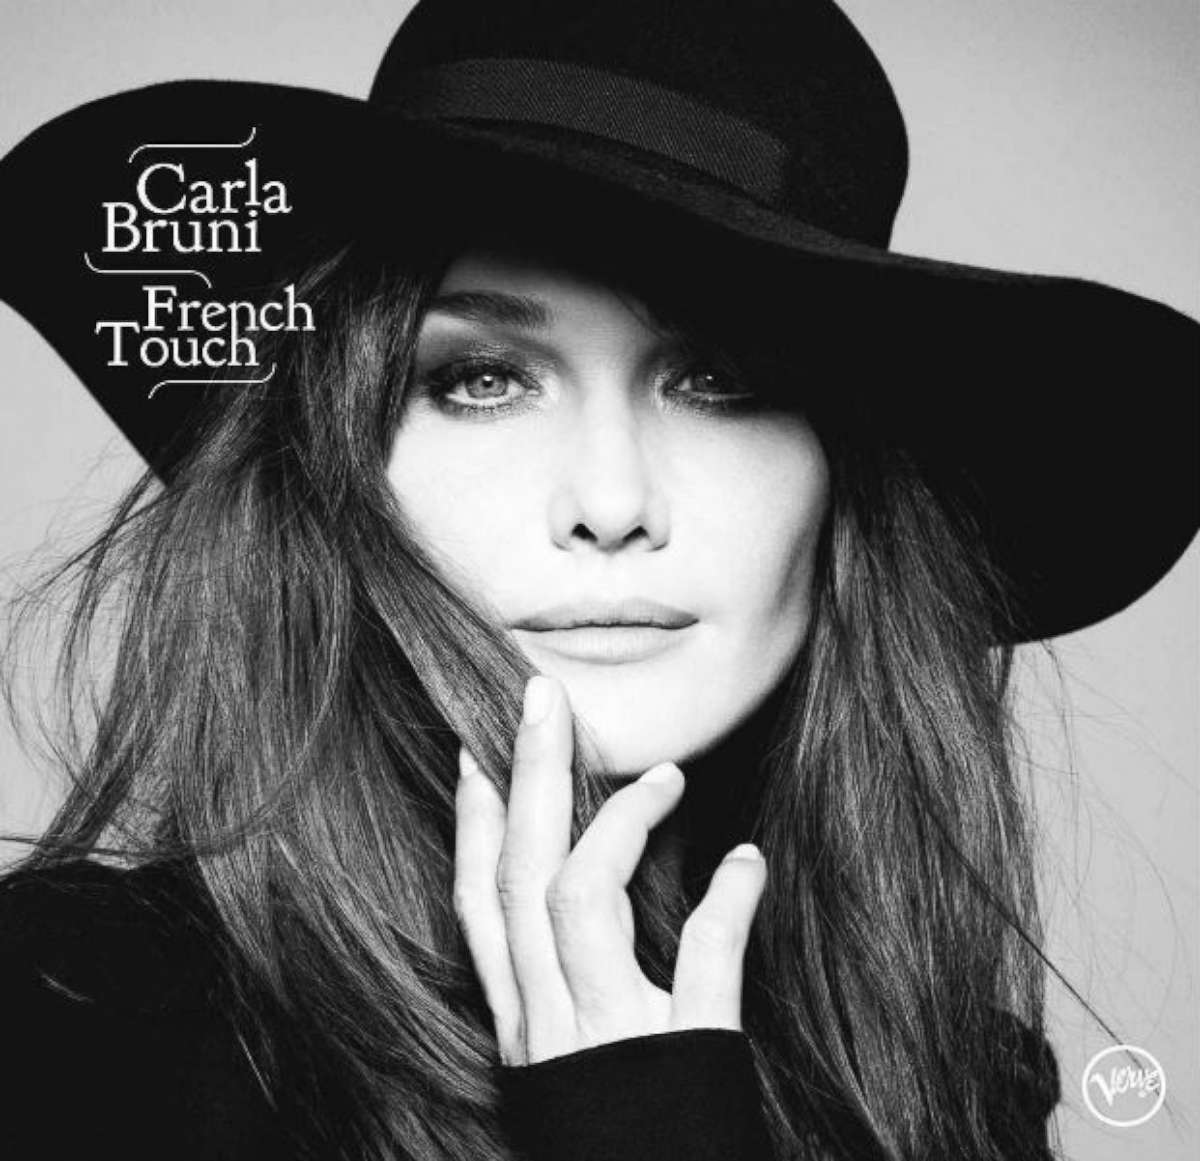 PHOTO: Carla Bruni - "French Touch"